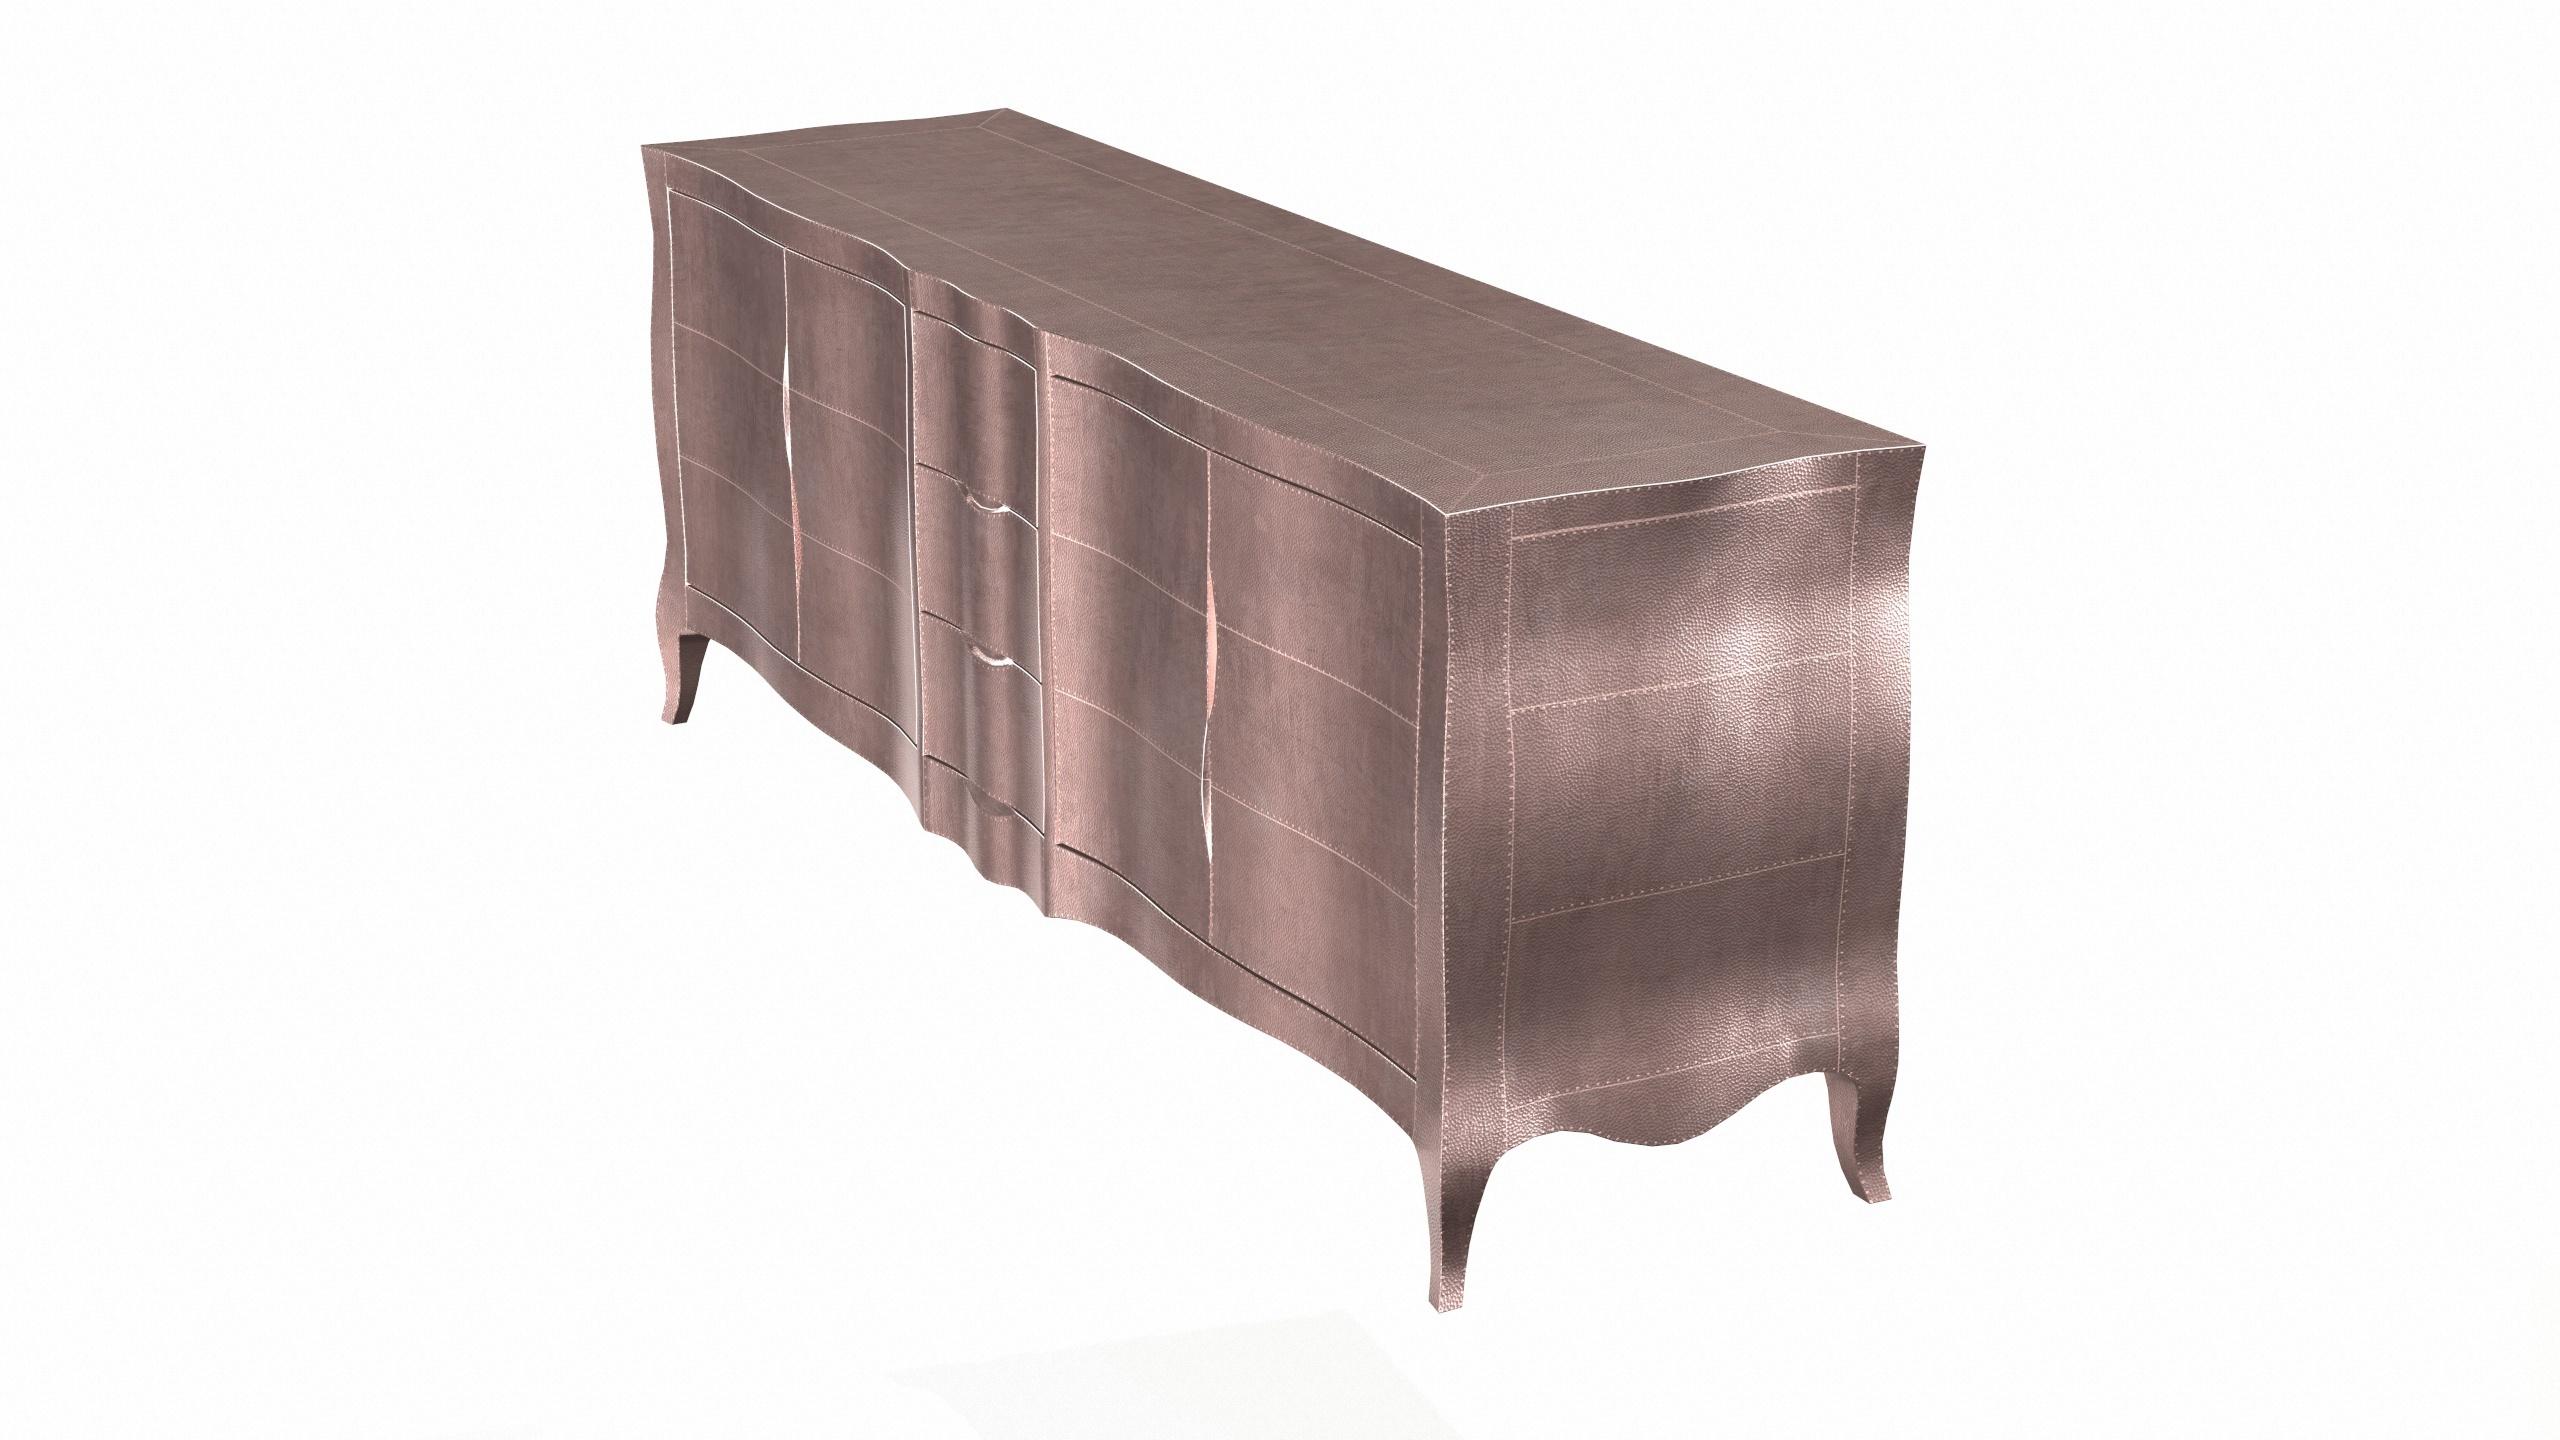 Hand-Carved Louise Credenza Art Deco Dressers in Mid. Hammered Copper by Paul Mathieu For Sale